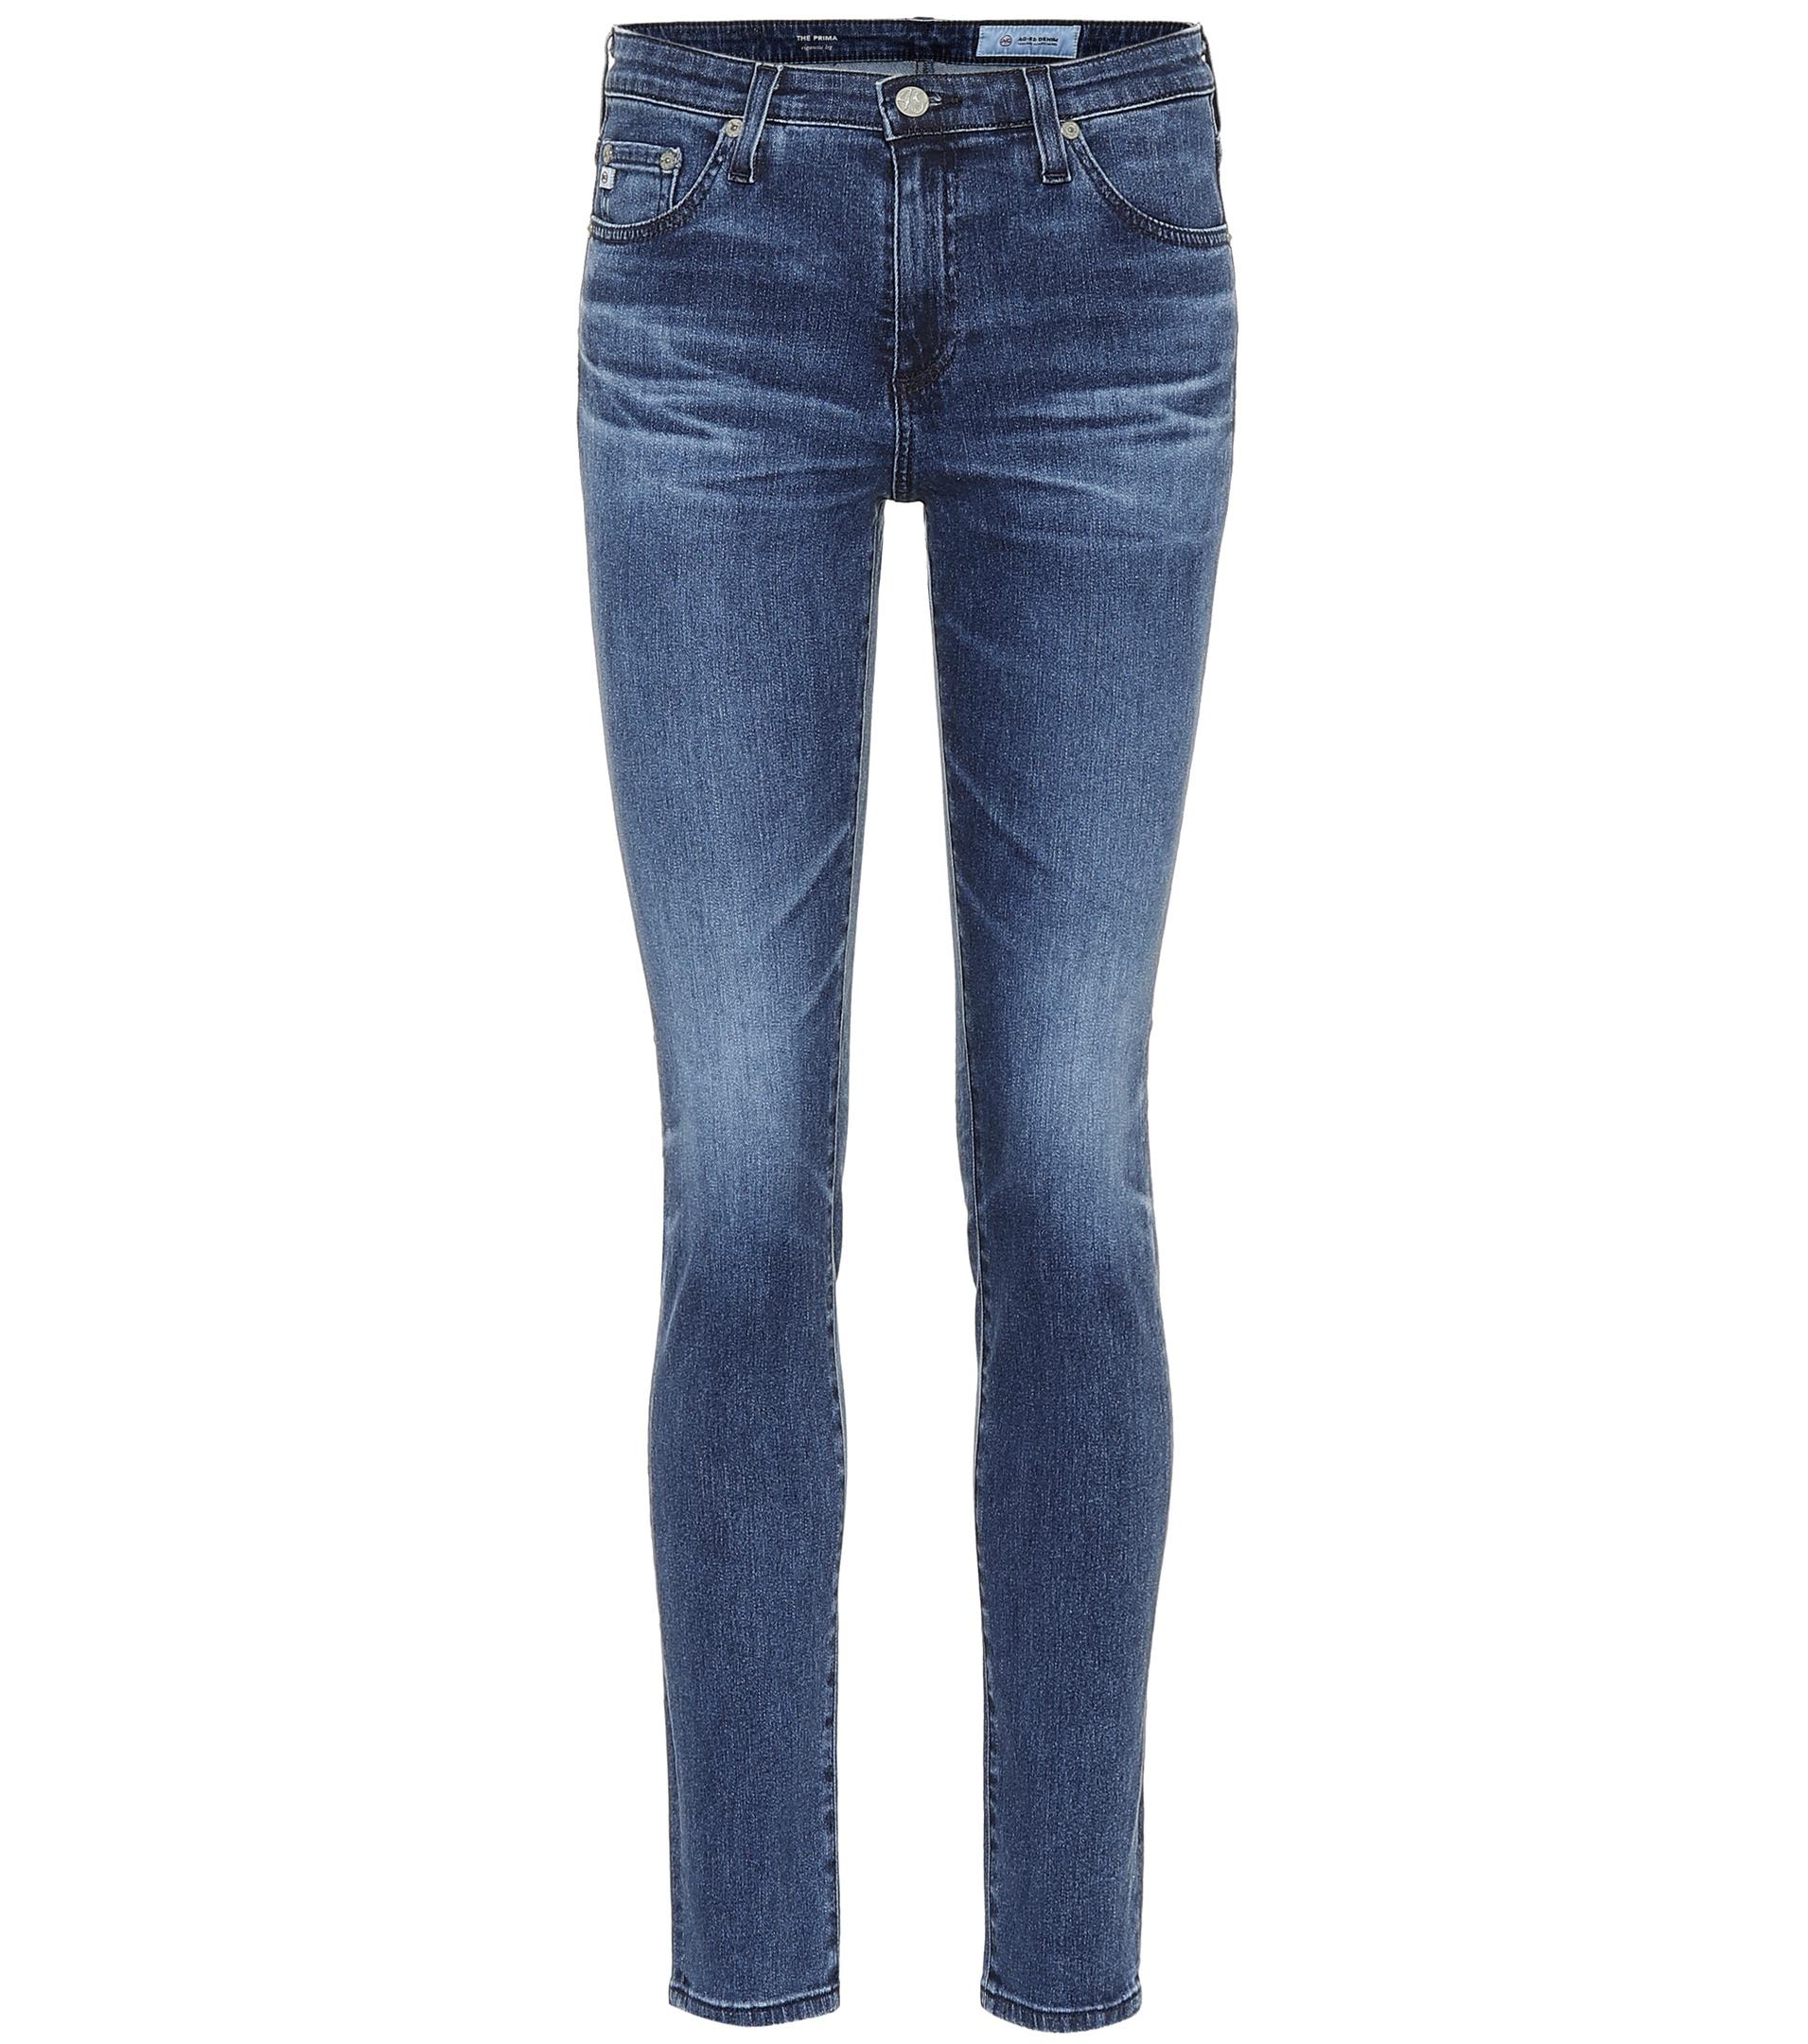 Lyst - Ag Jeans The Prima Mid-rise Skinny Jeans in Blue